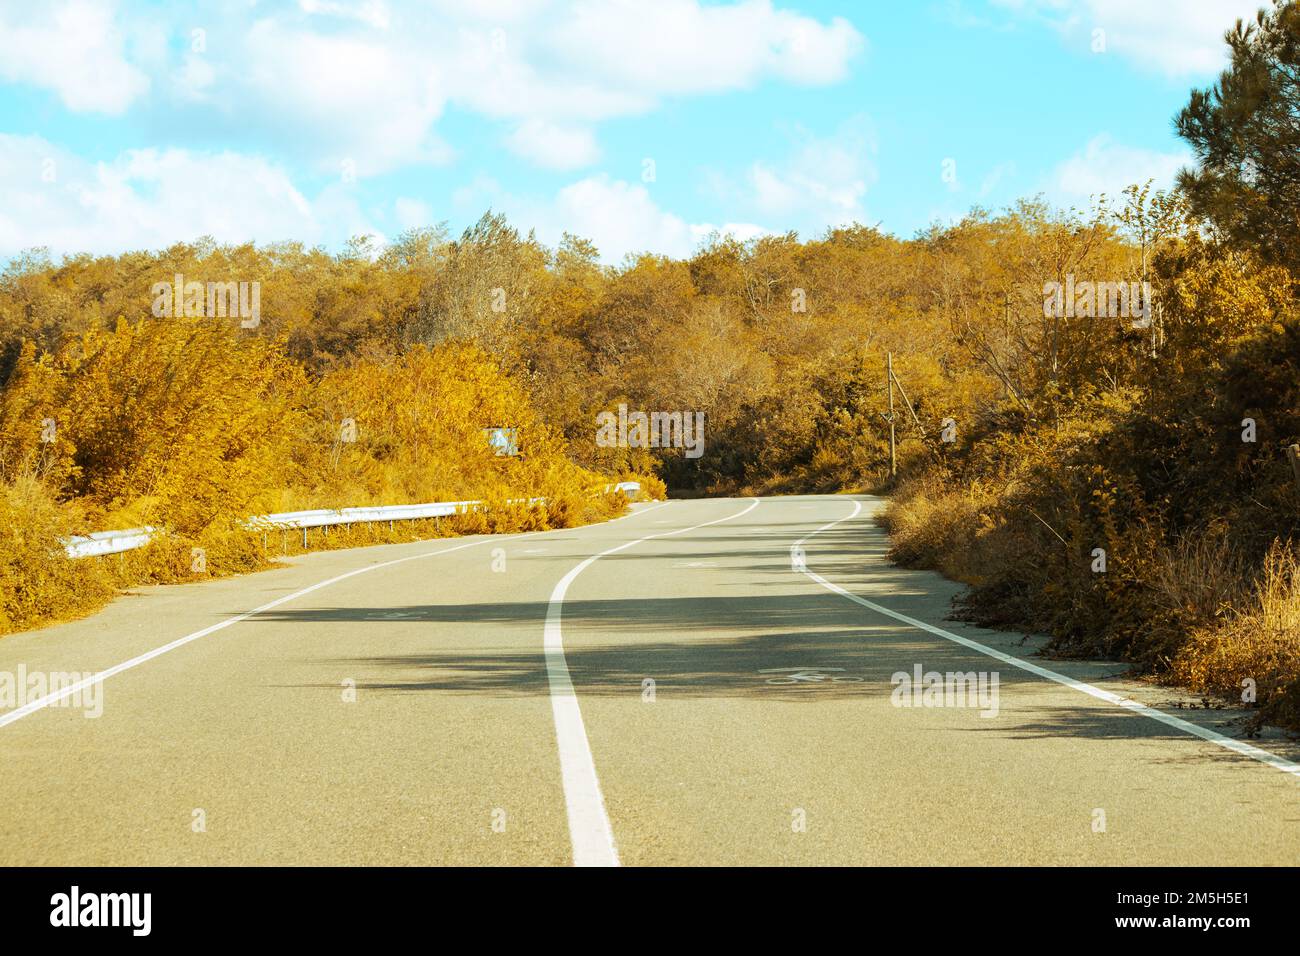 Rural way, passing through the yellowed trees asphalt forest road. Cloudy and blue sky. Away from people. No people, nobody. Road trip idea concept. Stock Photo